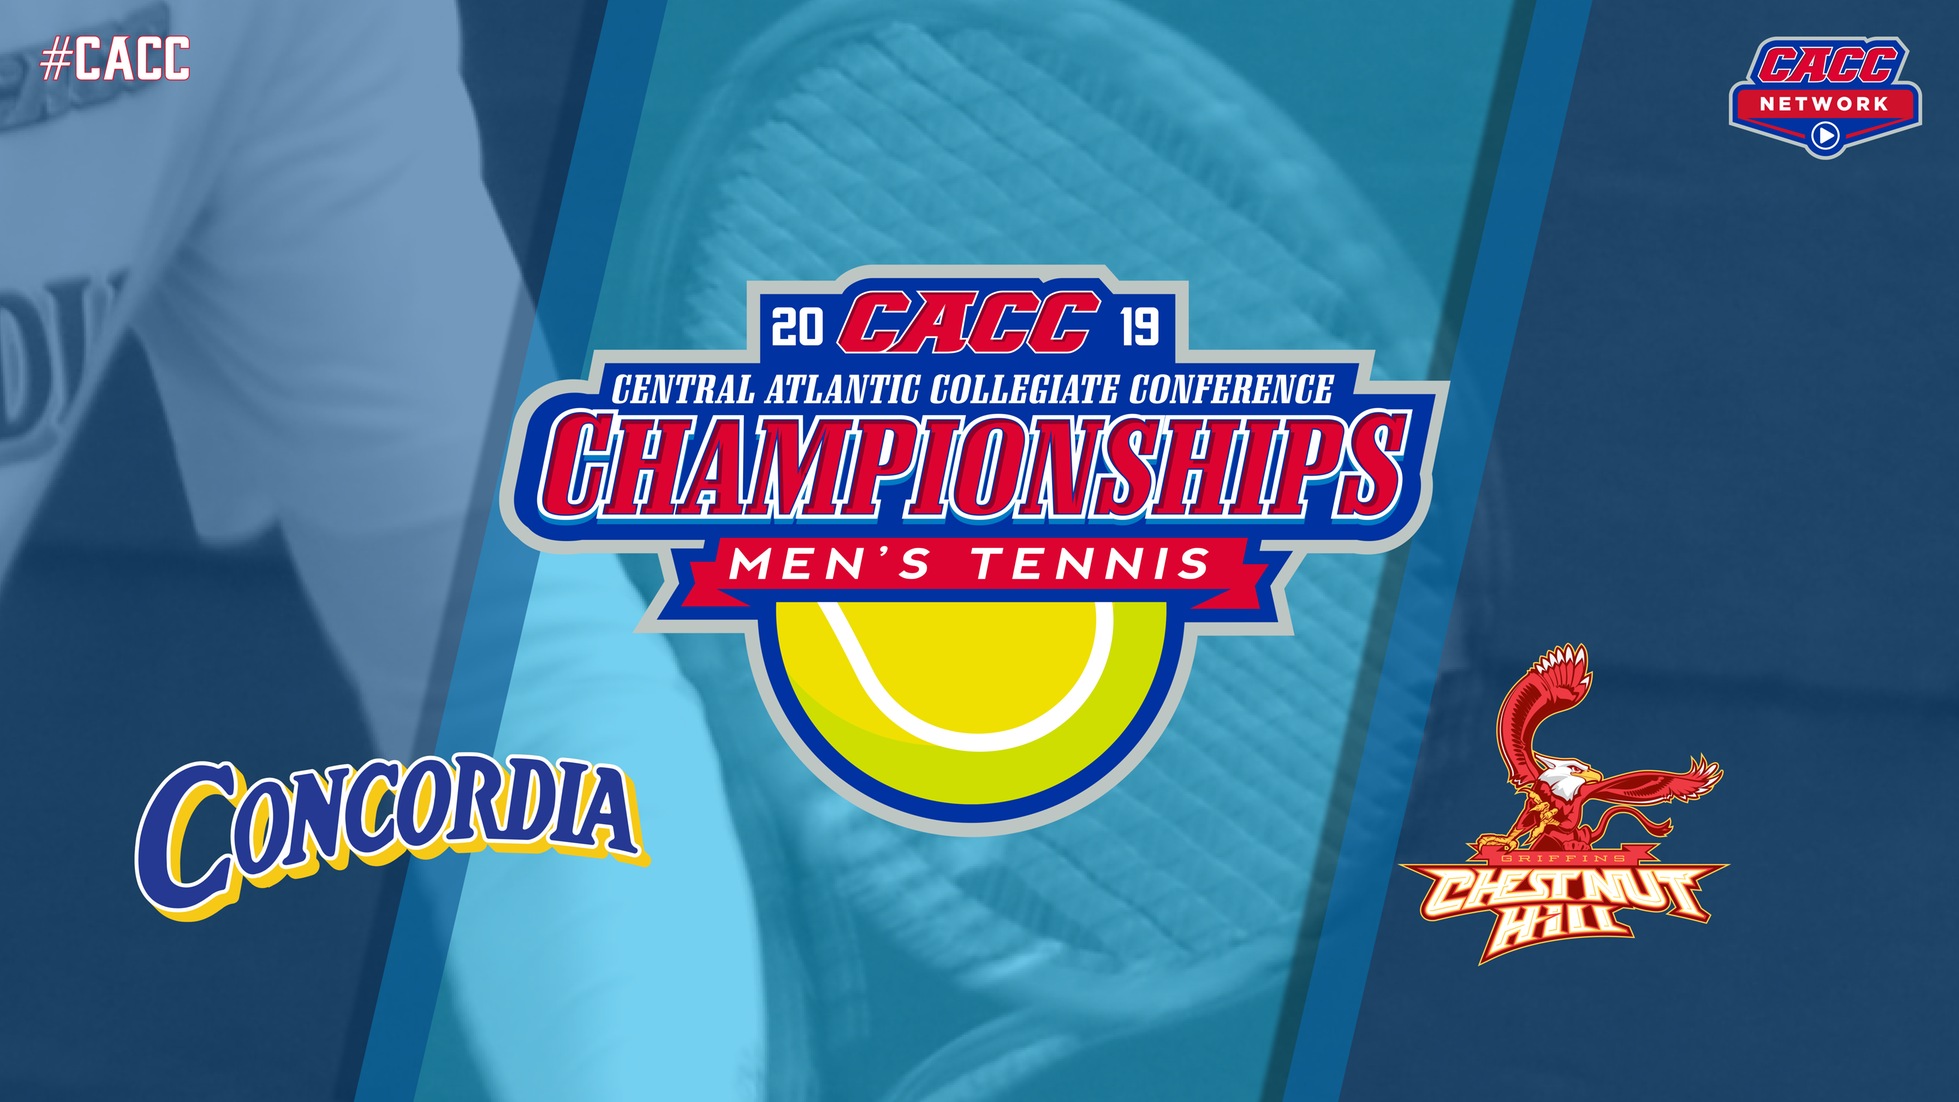 CACC Network to Webstream Saturday's CACC Men's Tennis Championship Final Between Concordia & Chestnut Hill